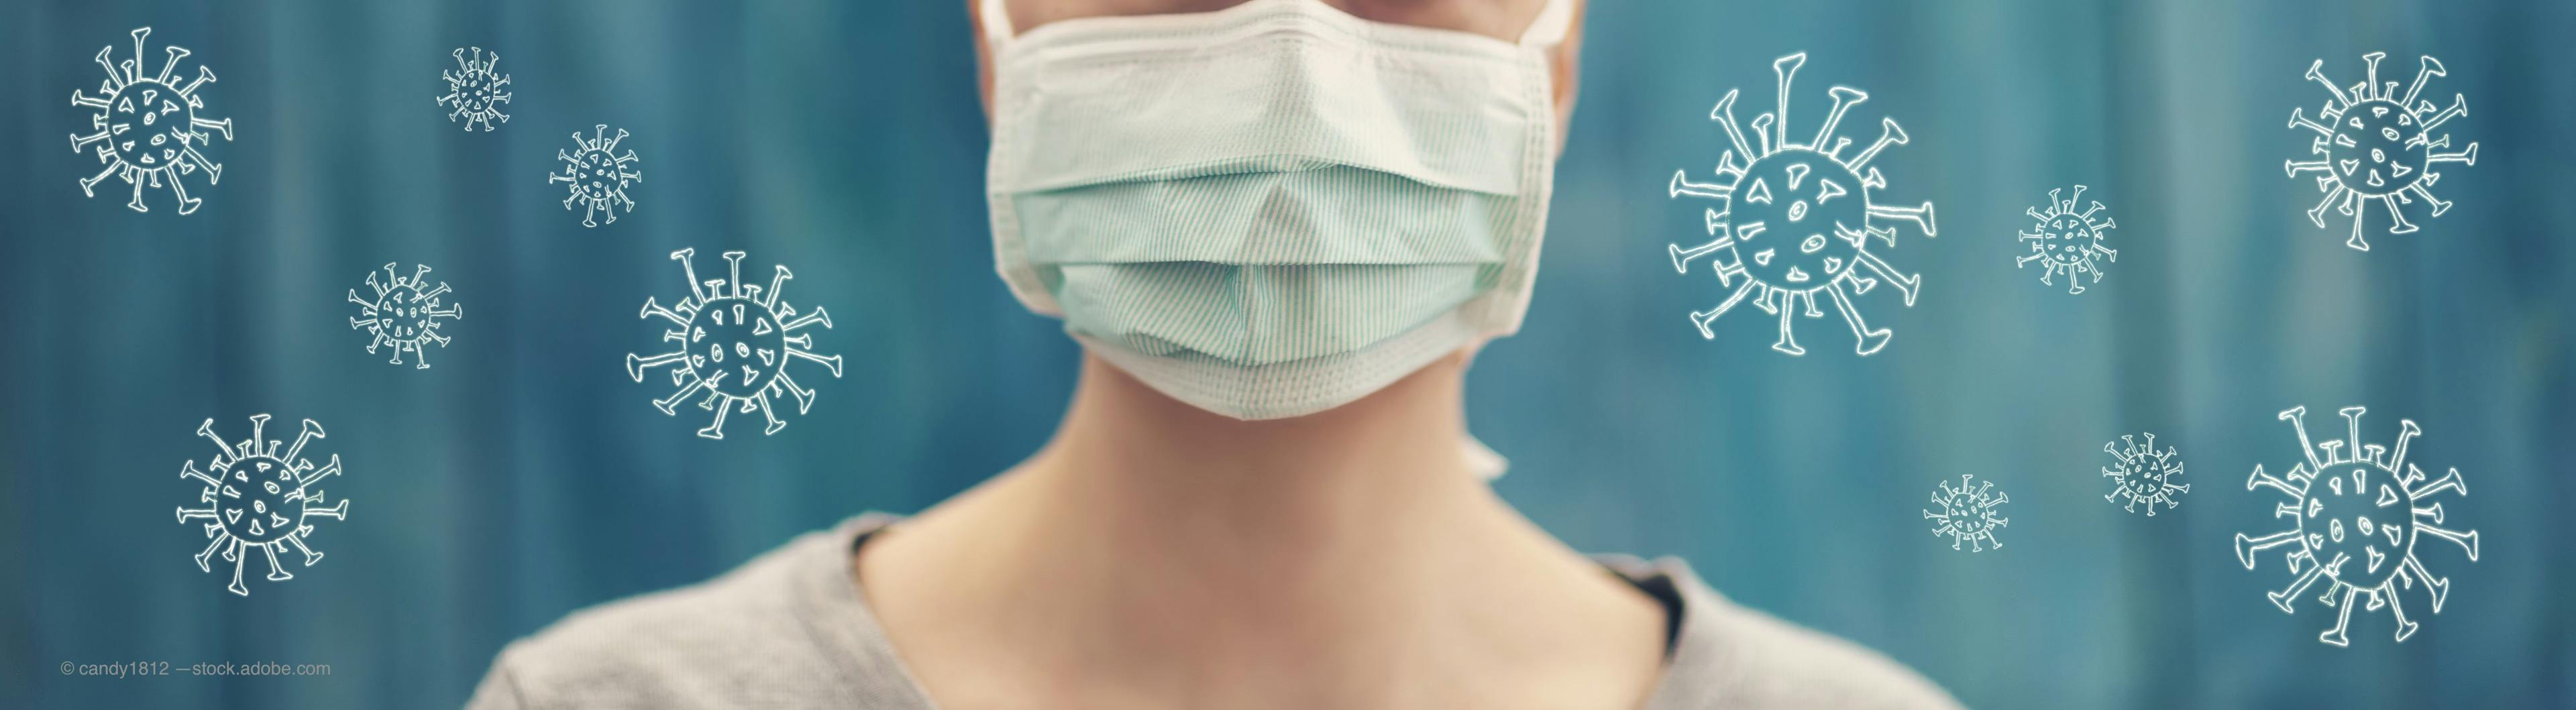 Patients undergoing injections during the COVID-19 pandemic experienced increases in bacterial contamination of the periocular area of their surgical face masks when the masks were worn for longer than 4 hours, report Spanish researchers.